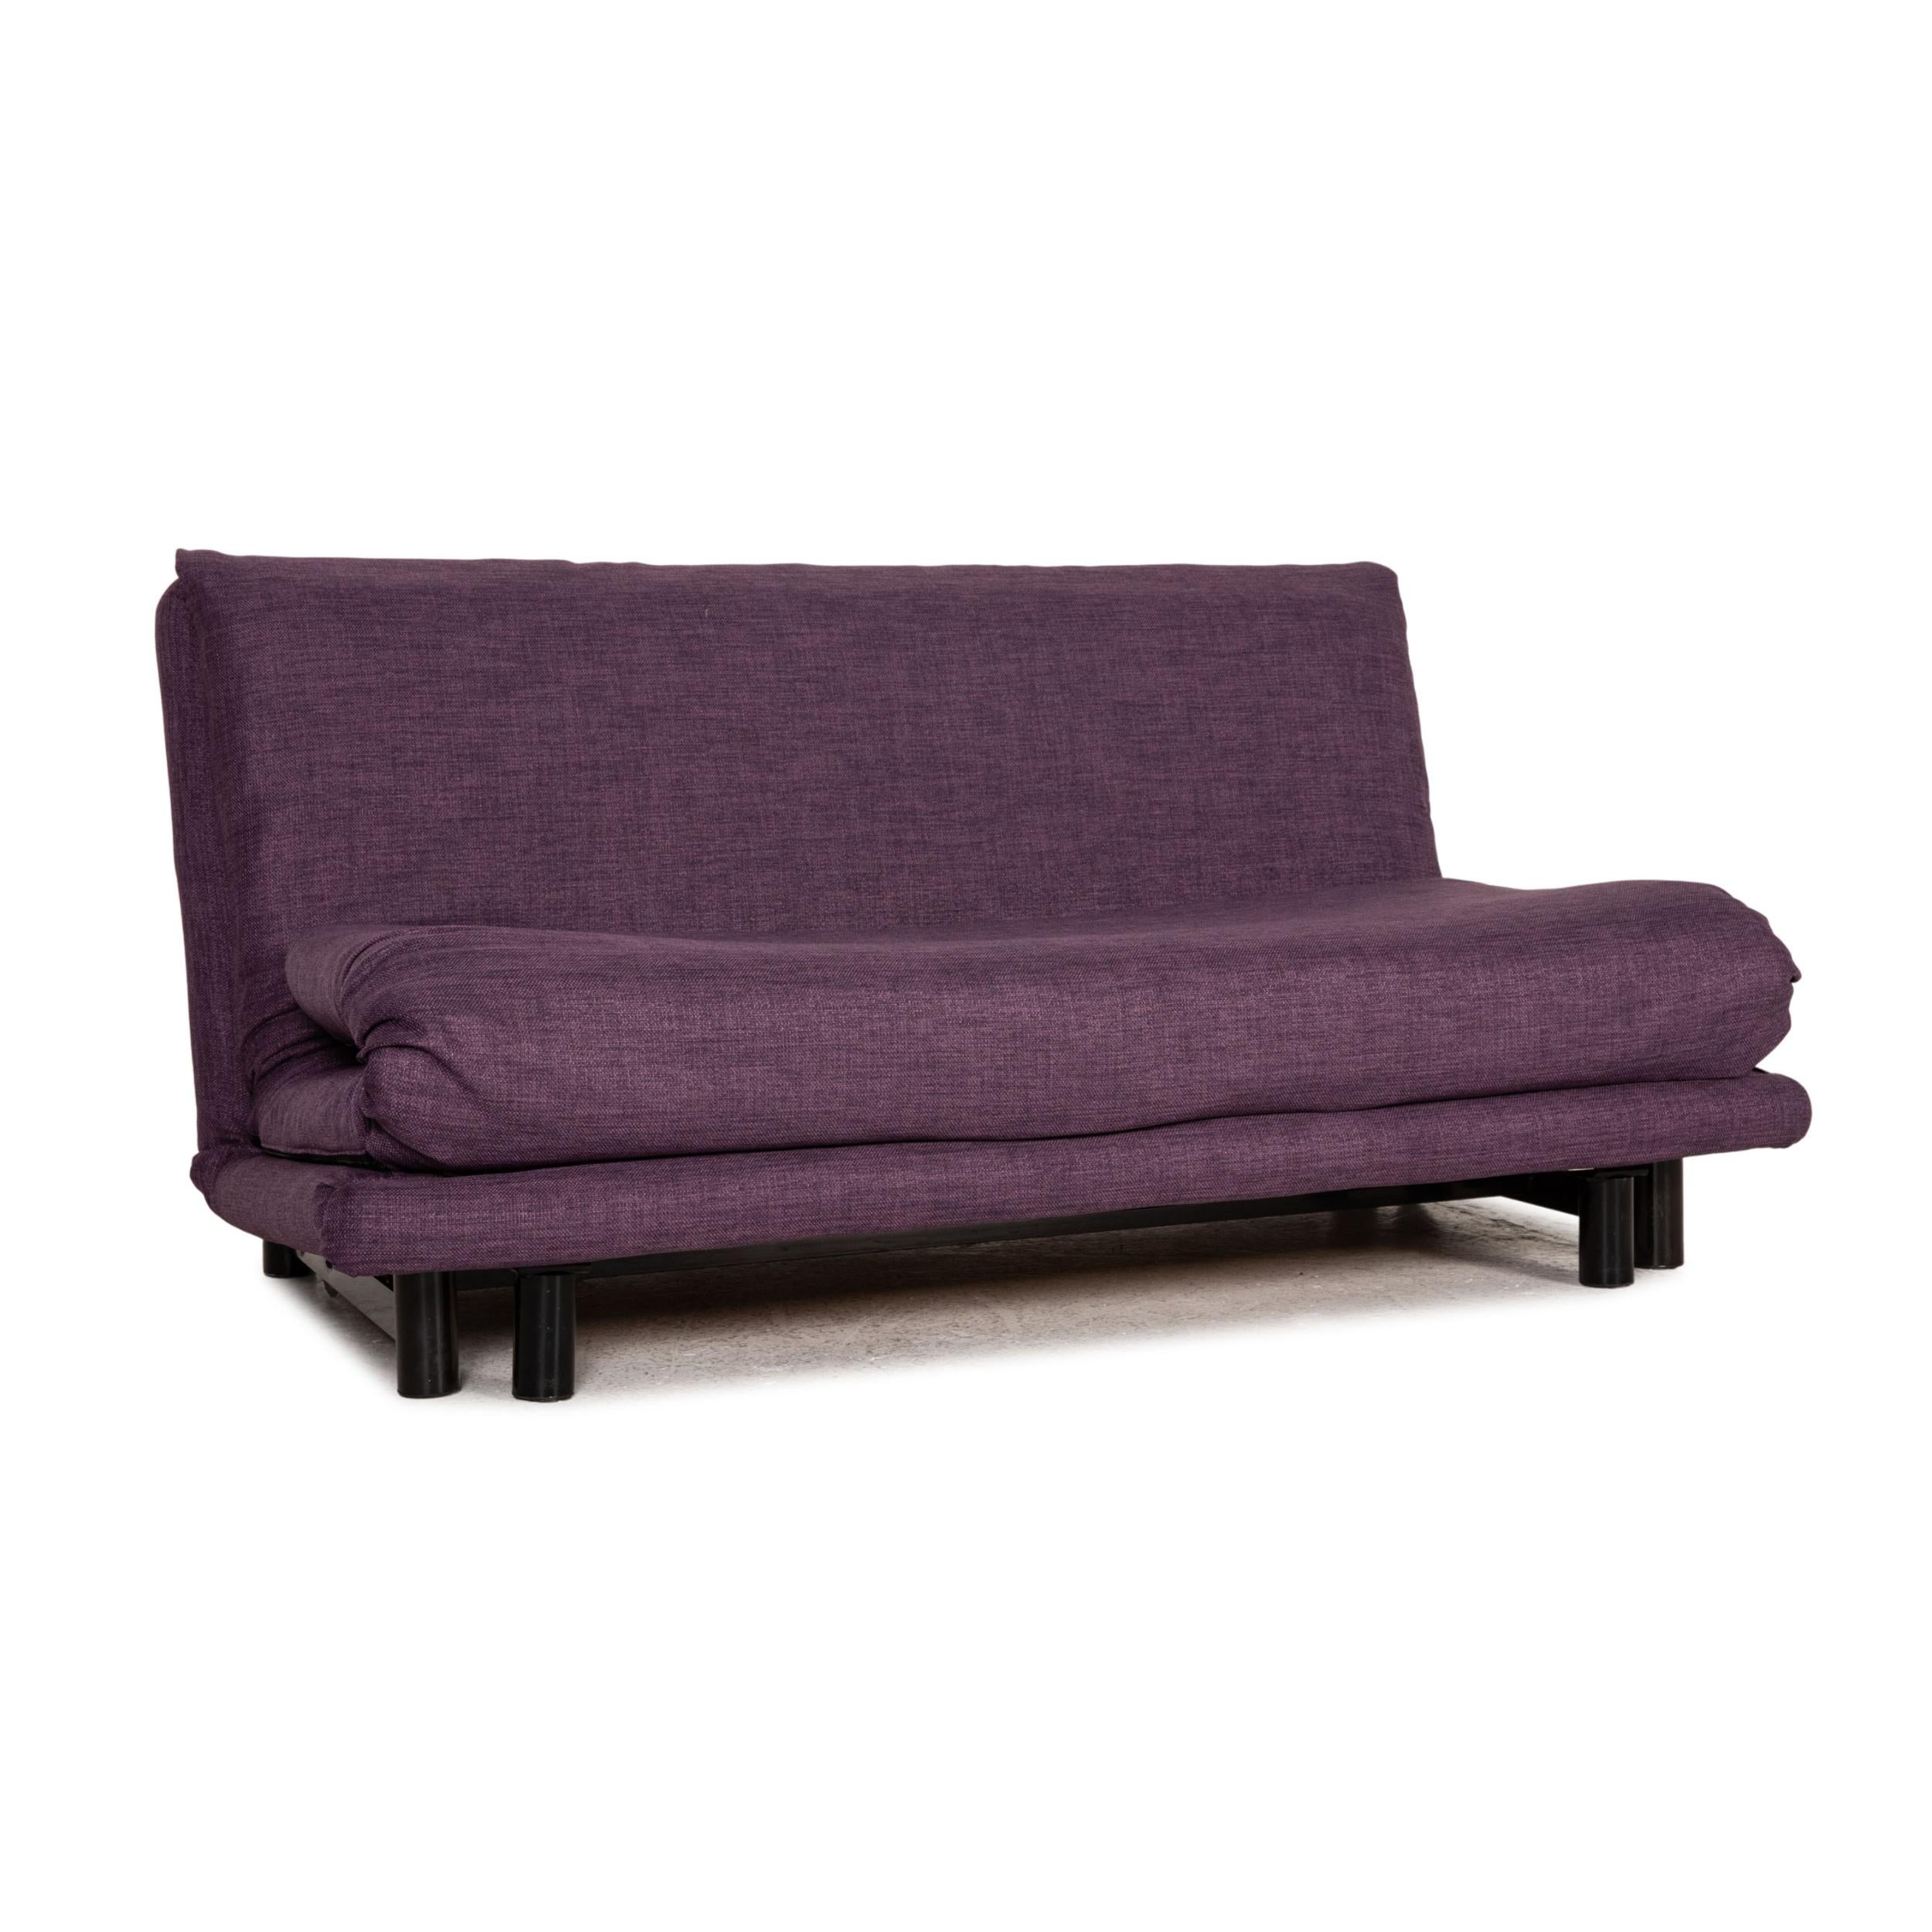 Contemporary Ligne Roset Multy Fabric Sofa Purple Three-Seater Couch Function Sleeping For Sale